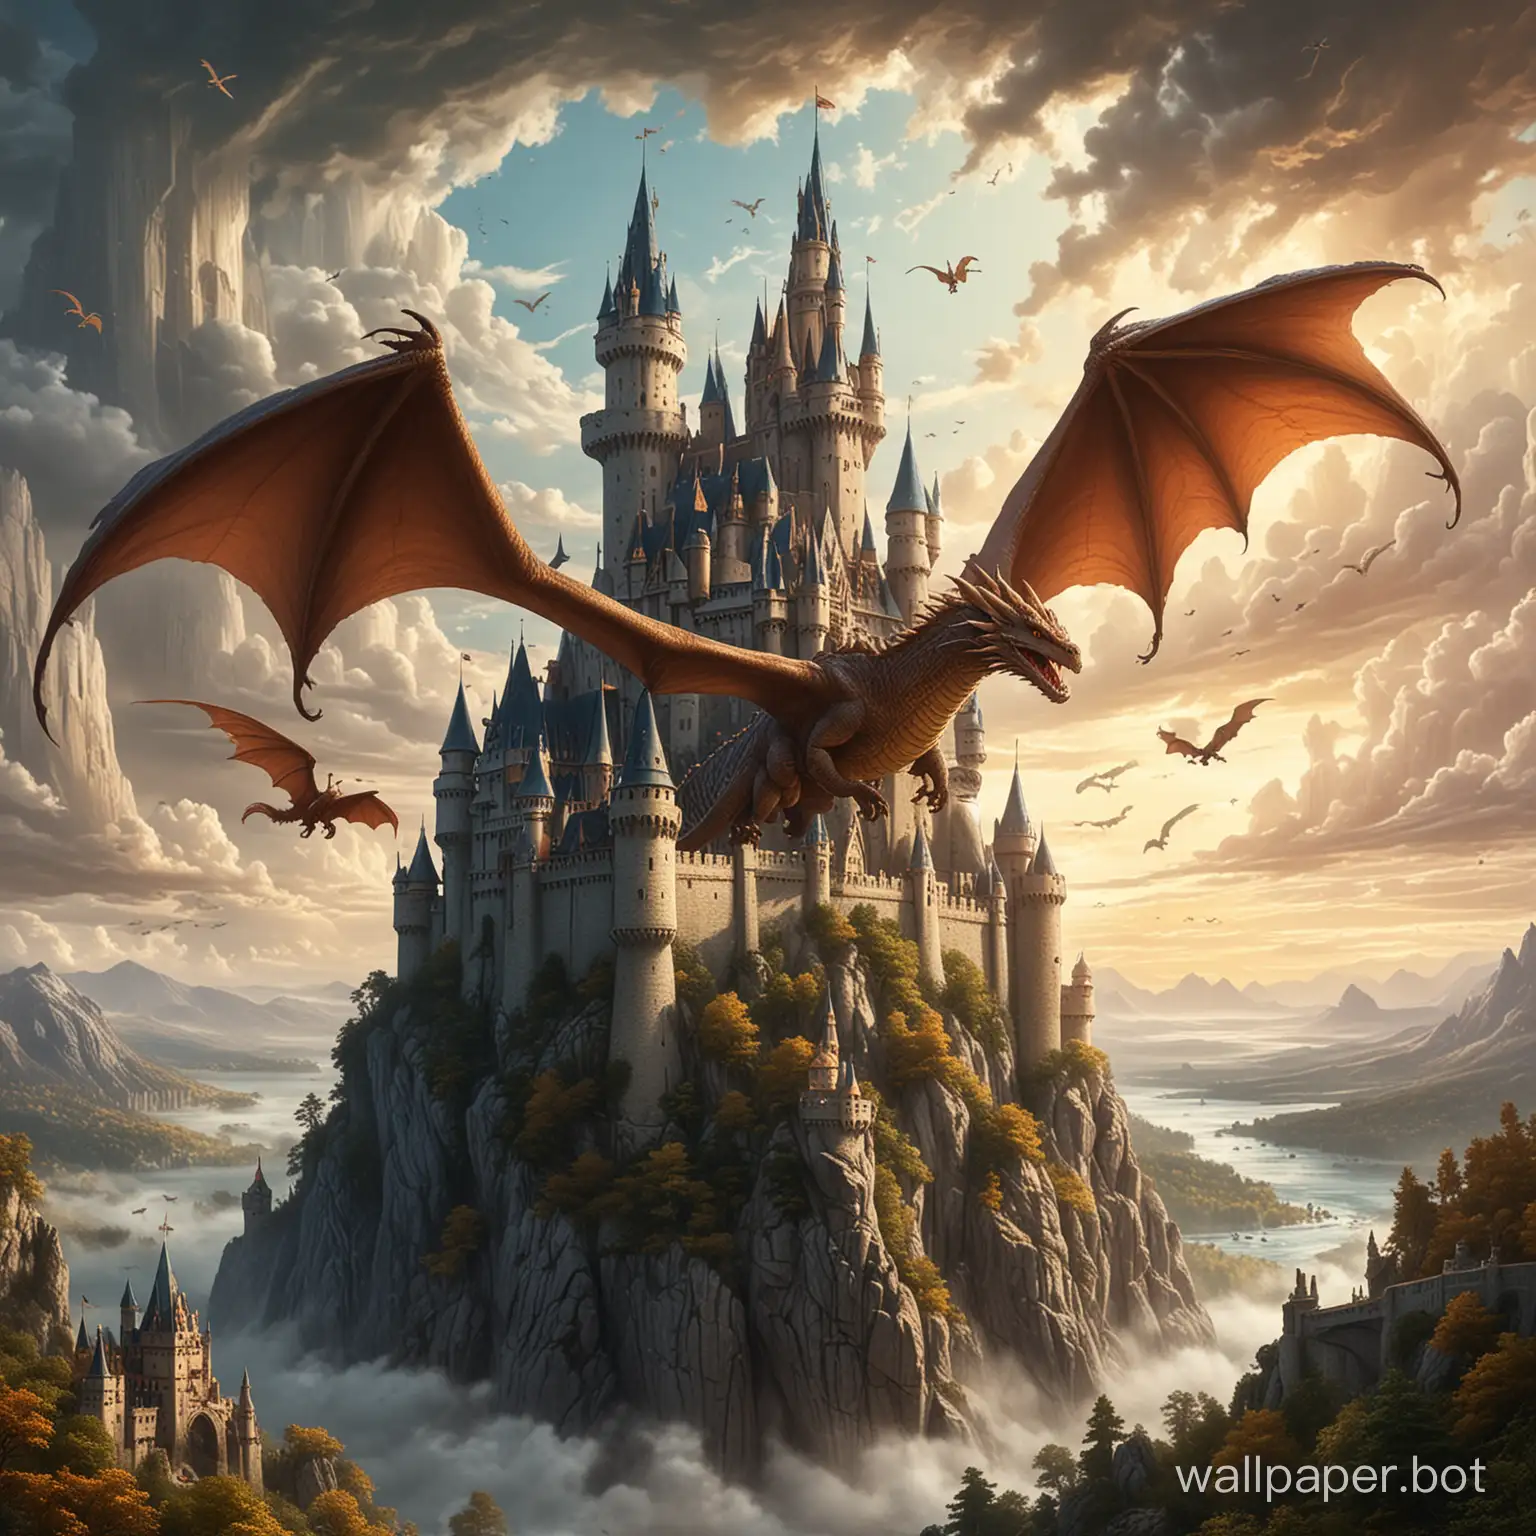 Draw a fantasy castle with a dragon flying over it